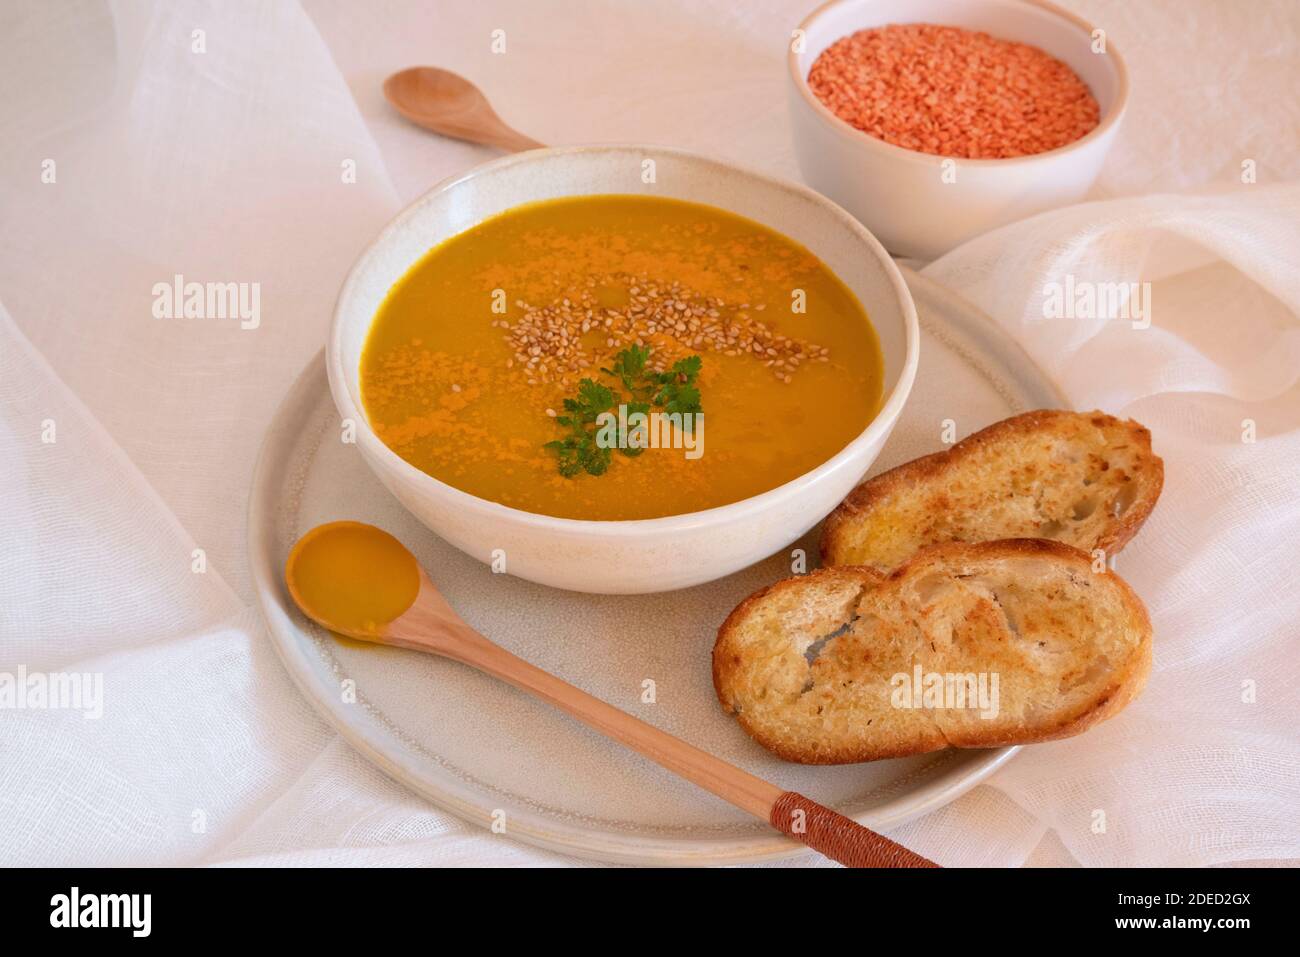 Orange soup in a bowl, pumpkin, carrot or coral lentils Stock Photo